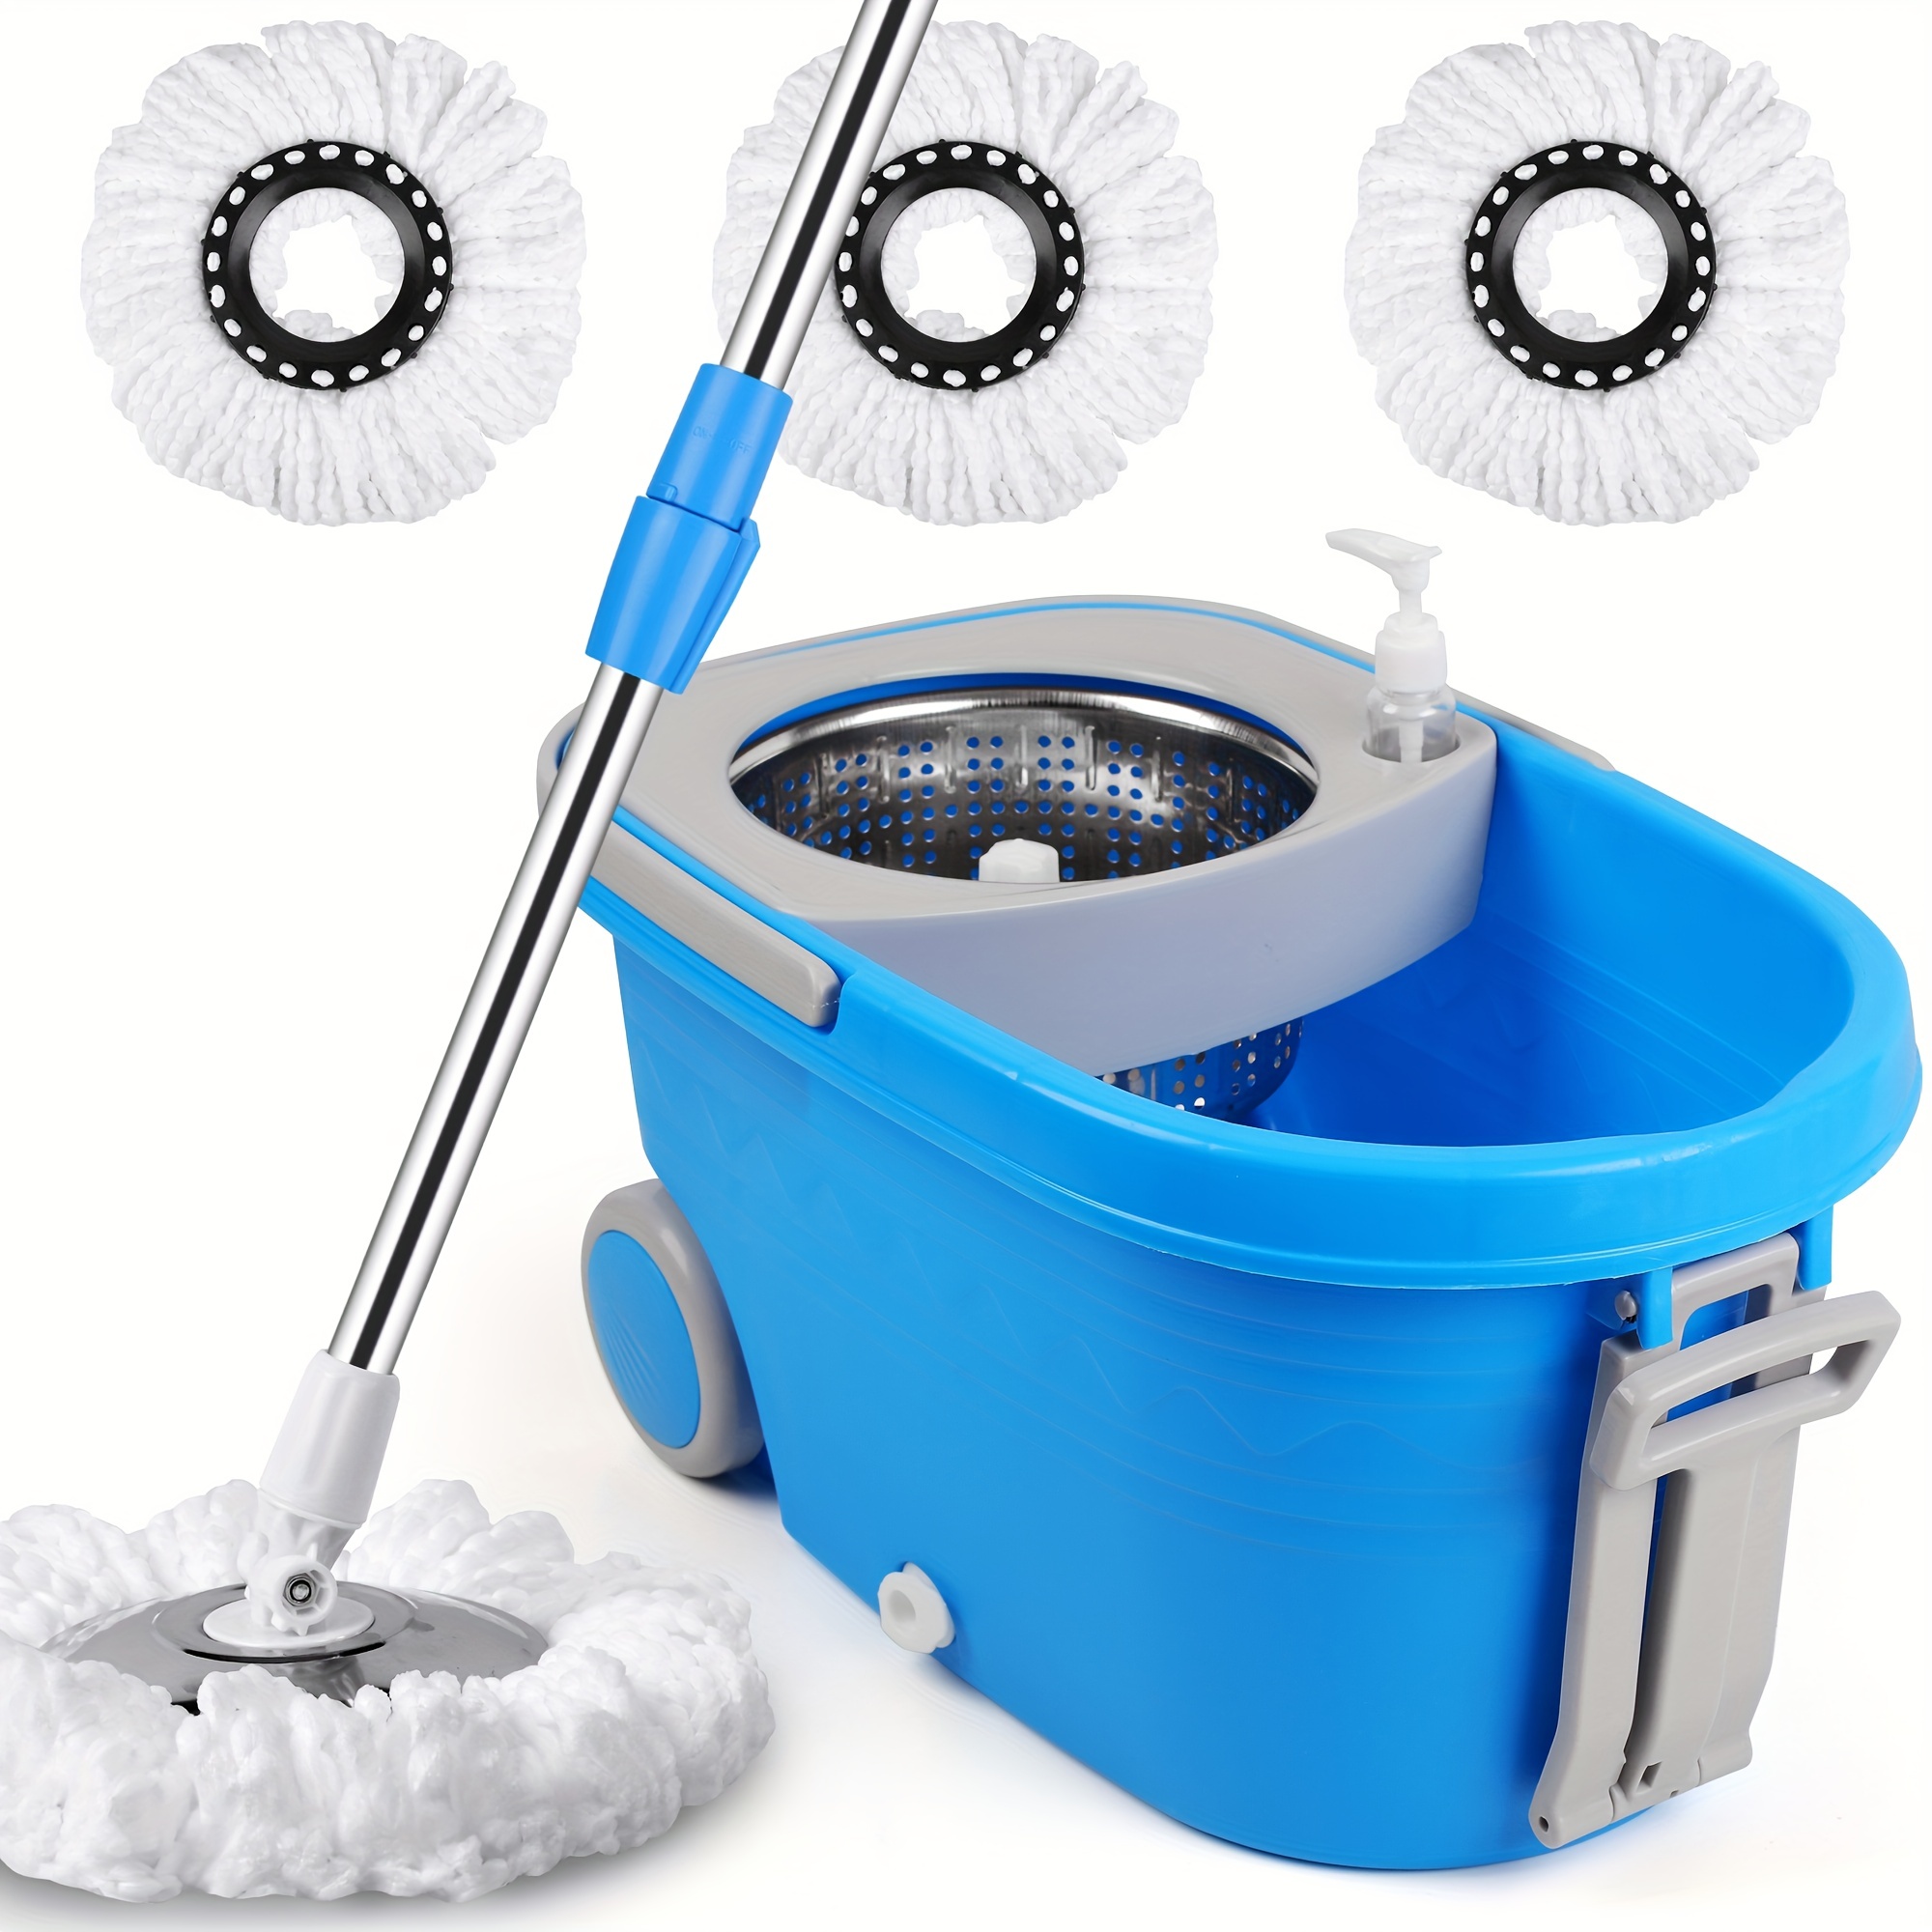 

Microfiber Spin Mop, Bucket Floor Cleaning System With 3 Extra Refills